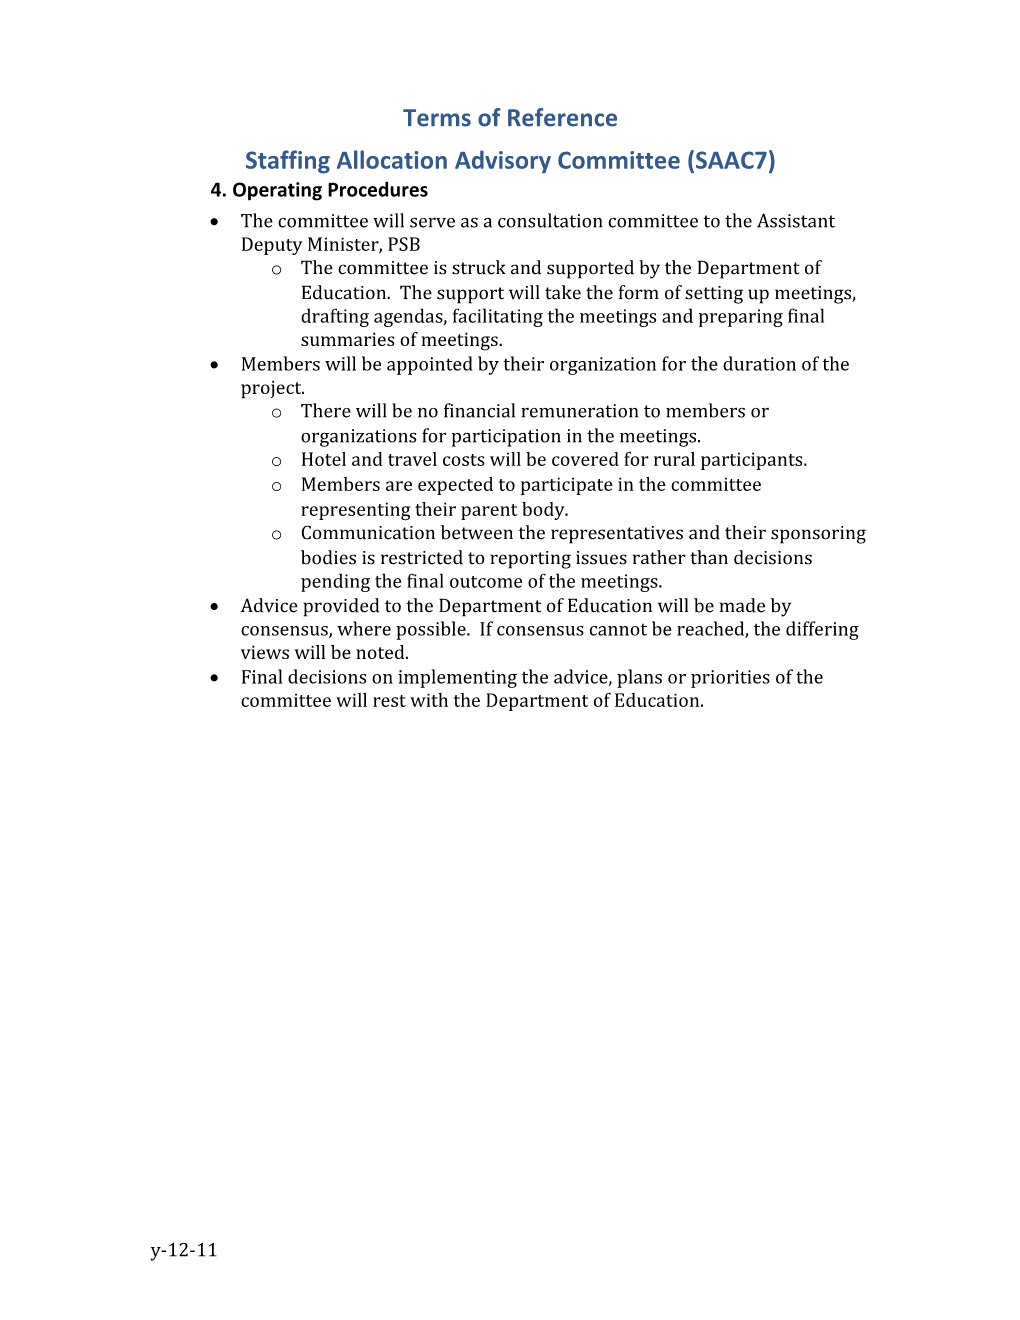 Staffing Allocation Advisory Committee (SAAC7)